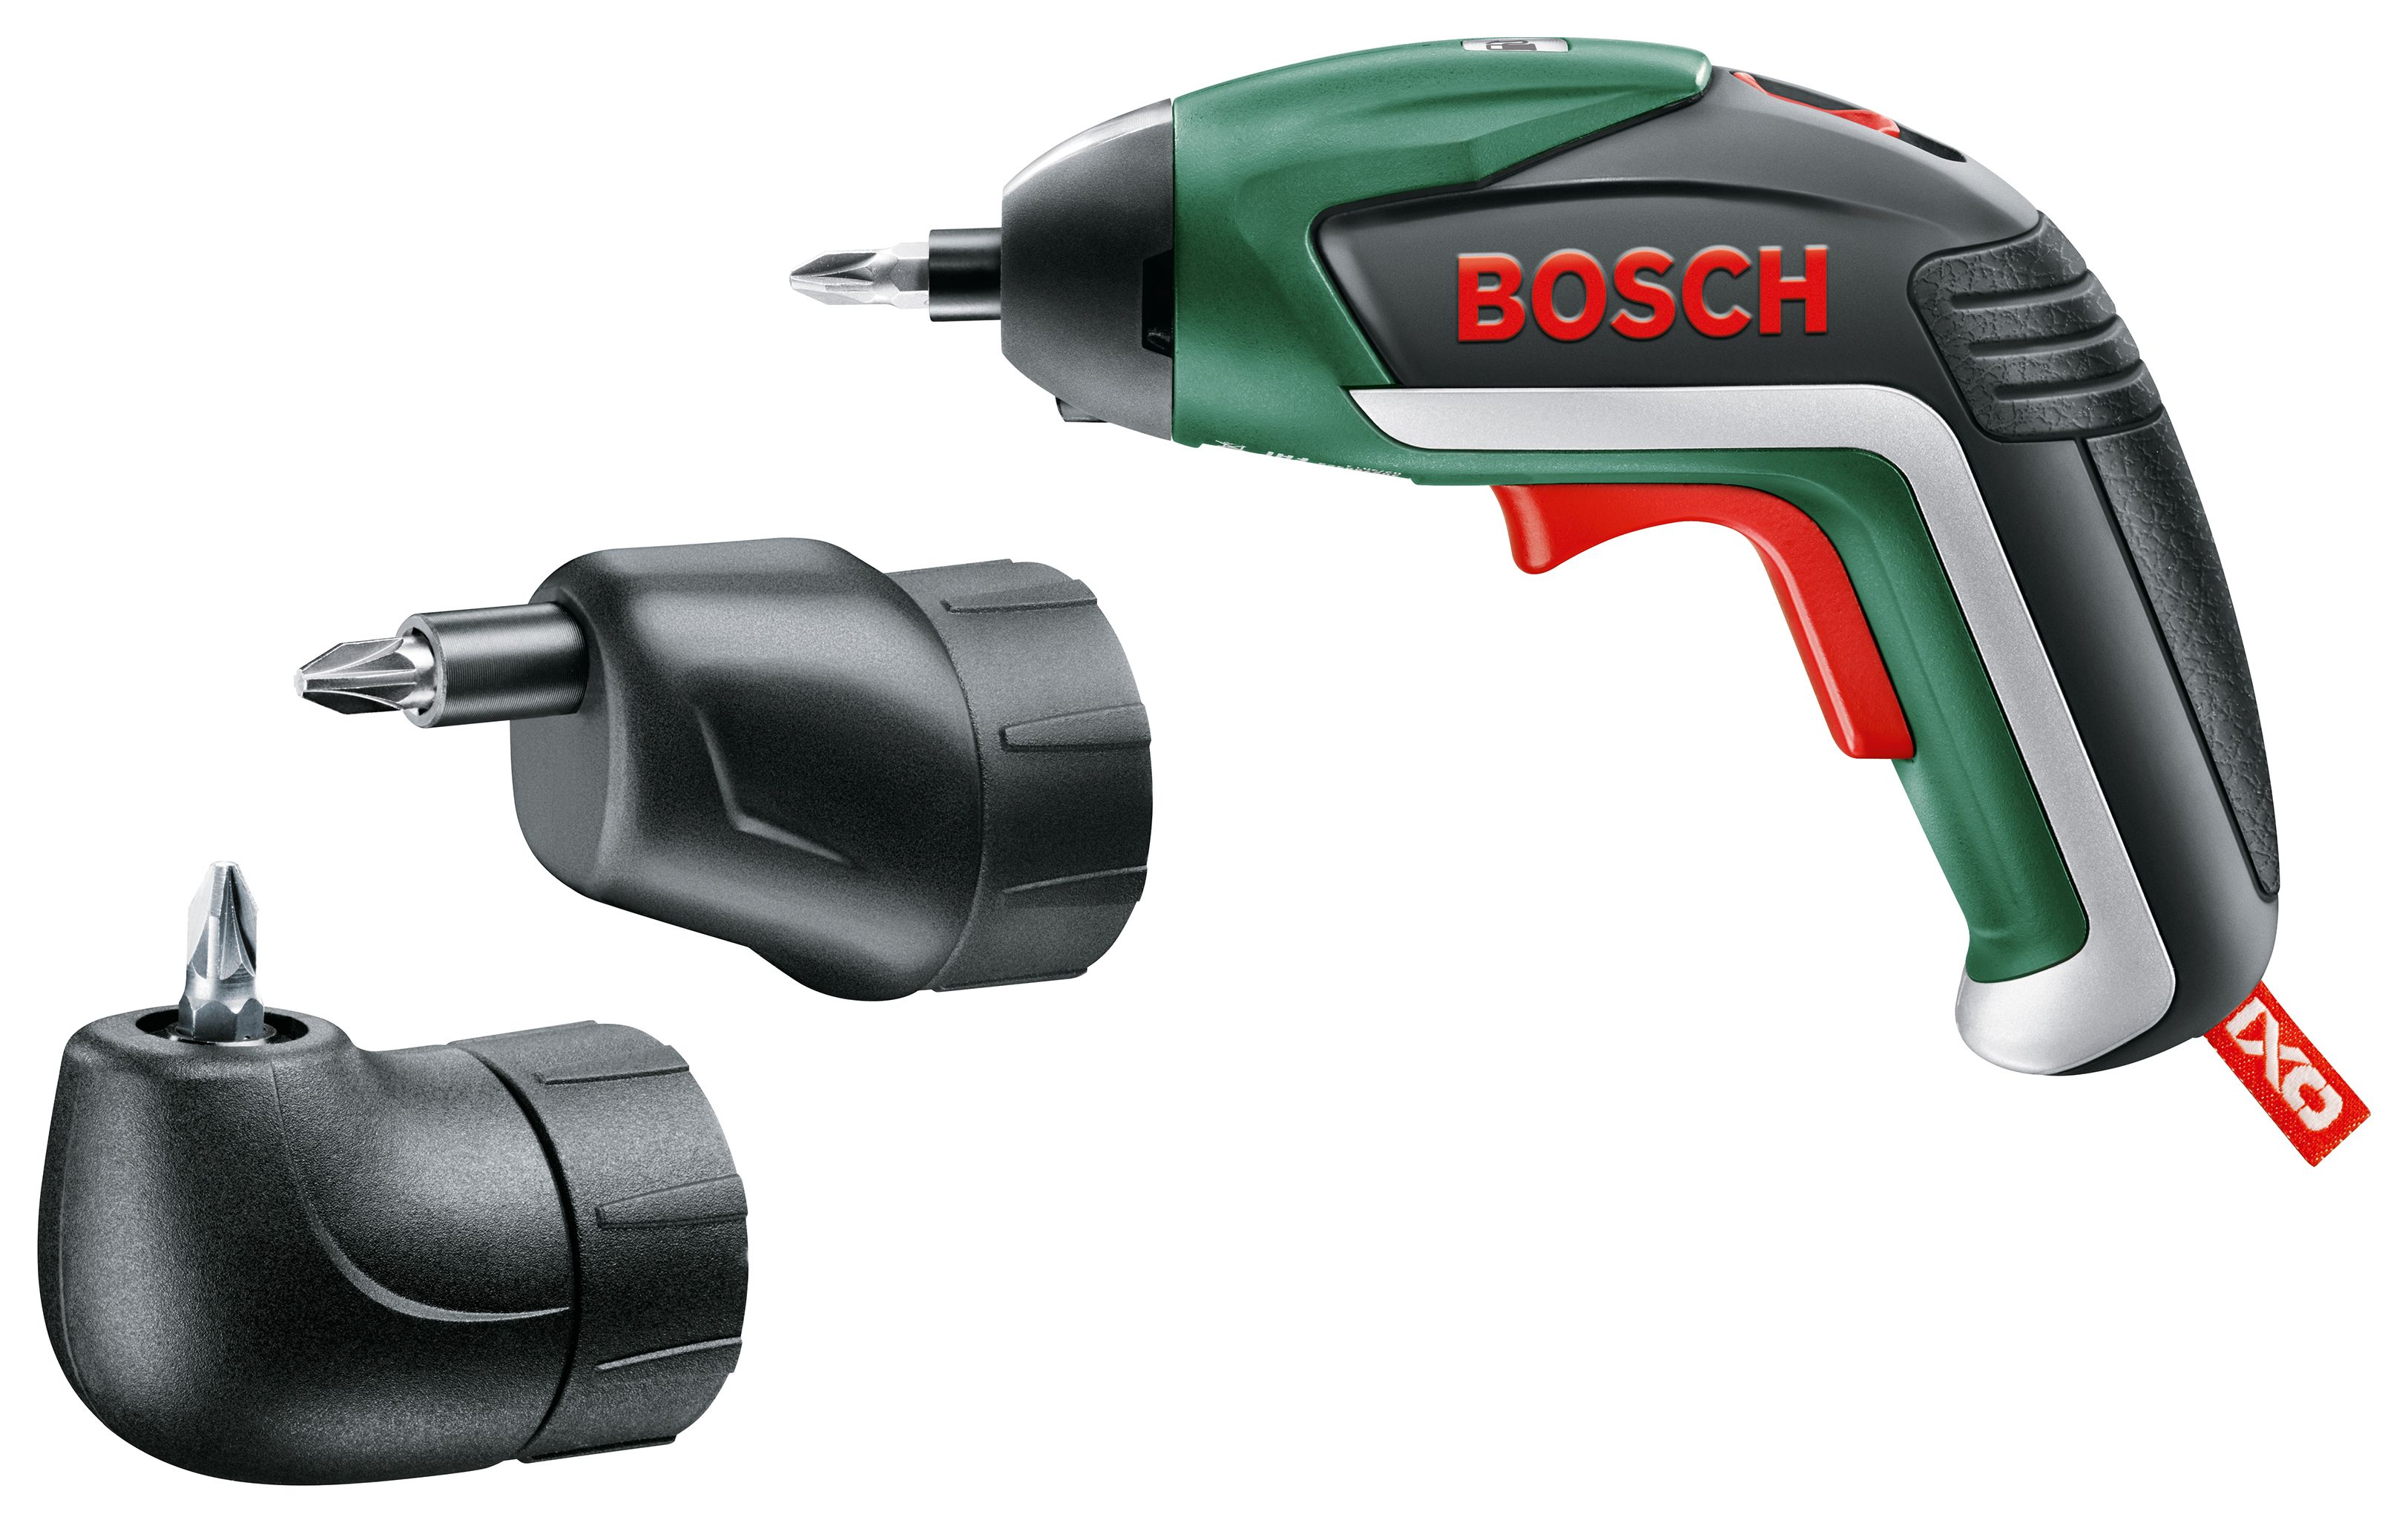 Image of Bosch IXO 3.6V 1.5Ah Li-Ion Cordless Screwdriver Full Version incl. Angle Adapter and Eccentric Adapter